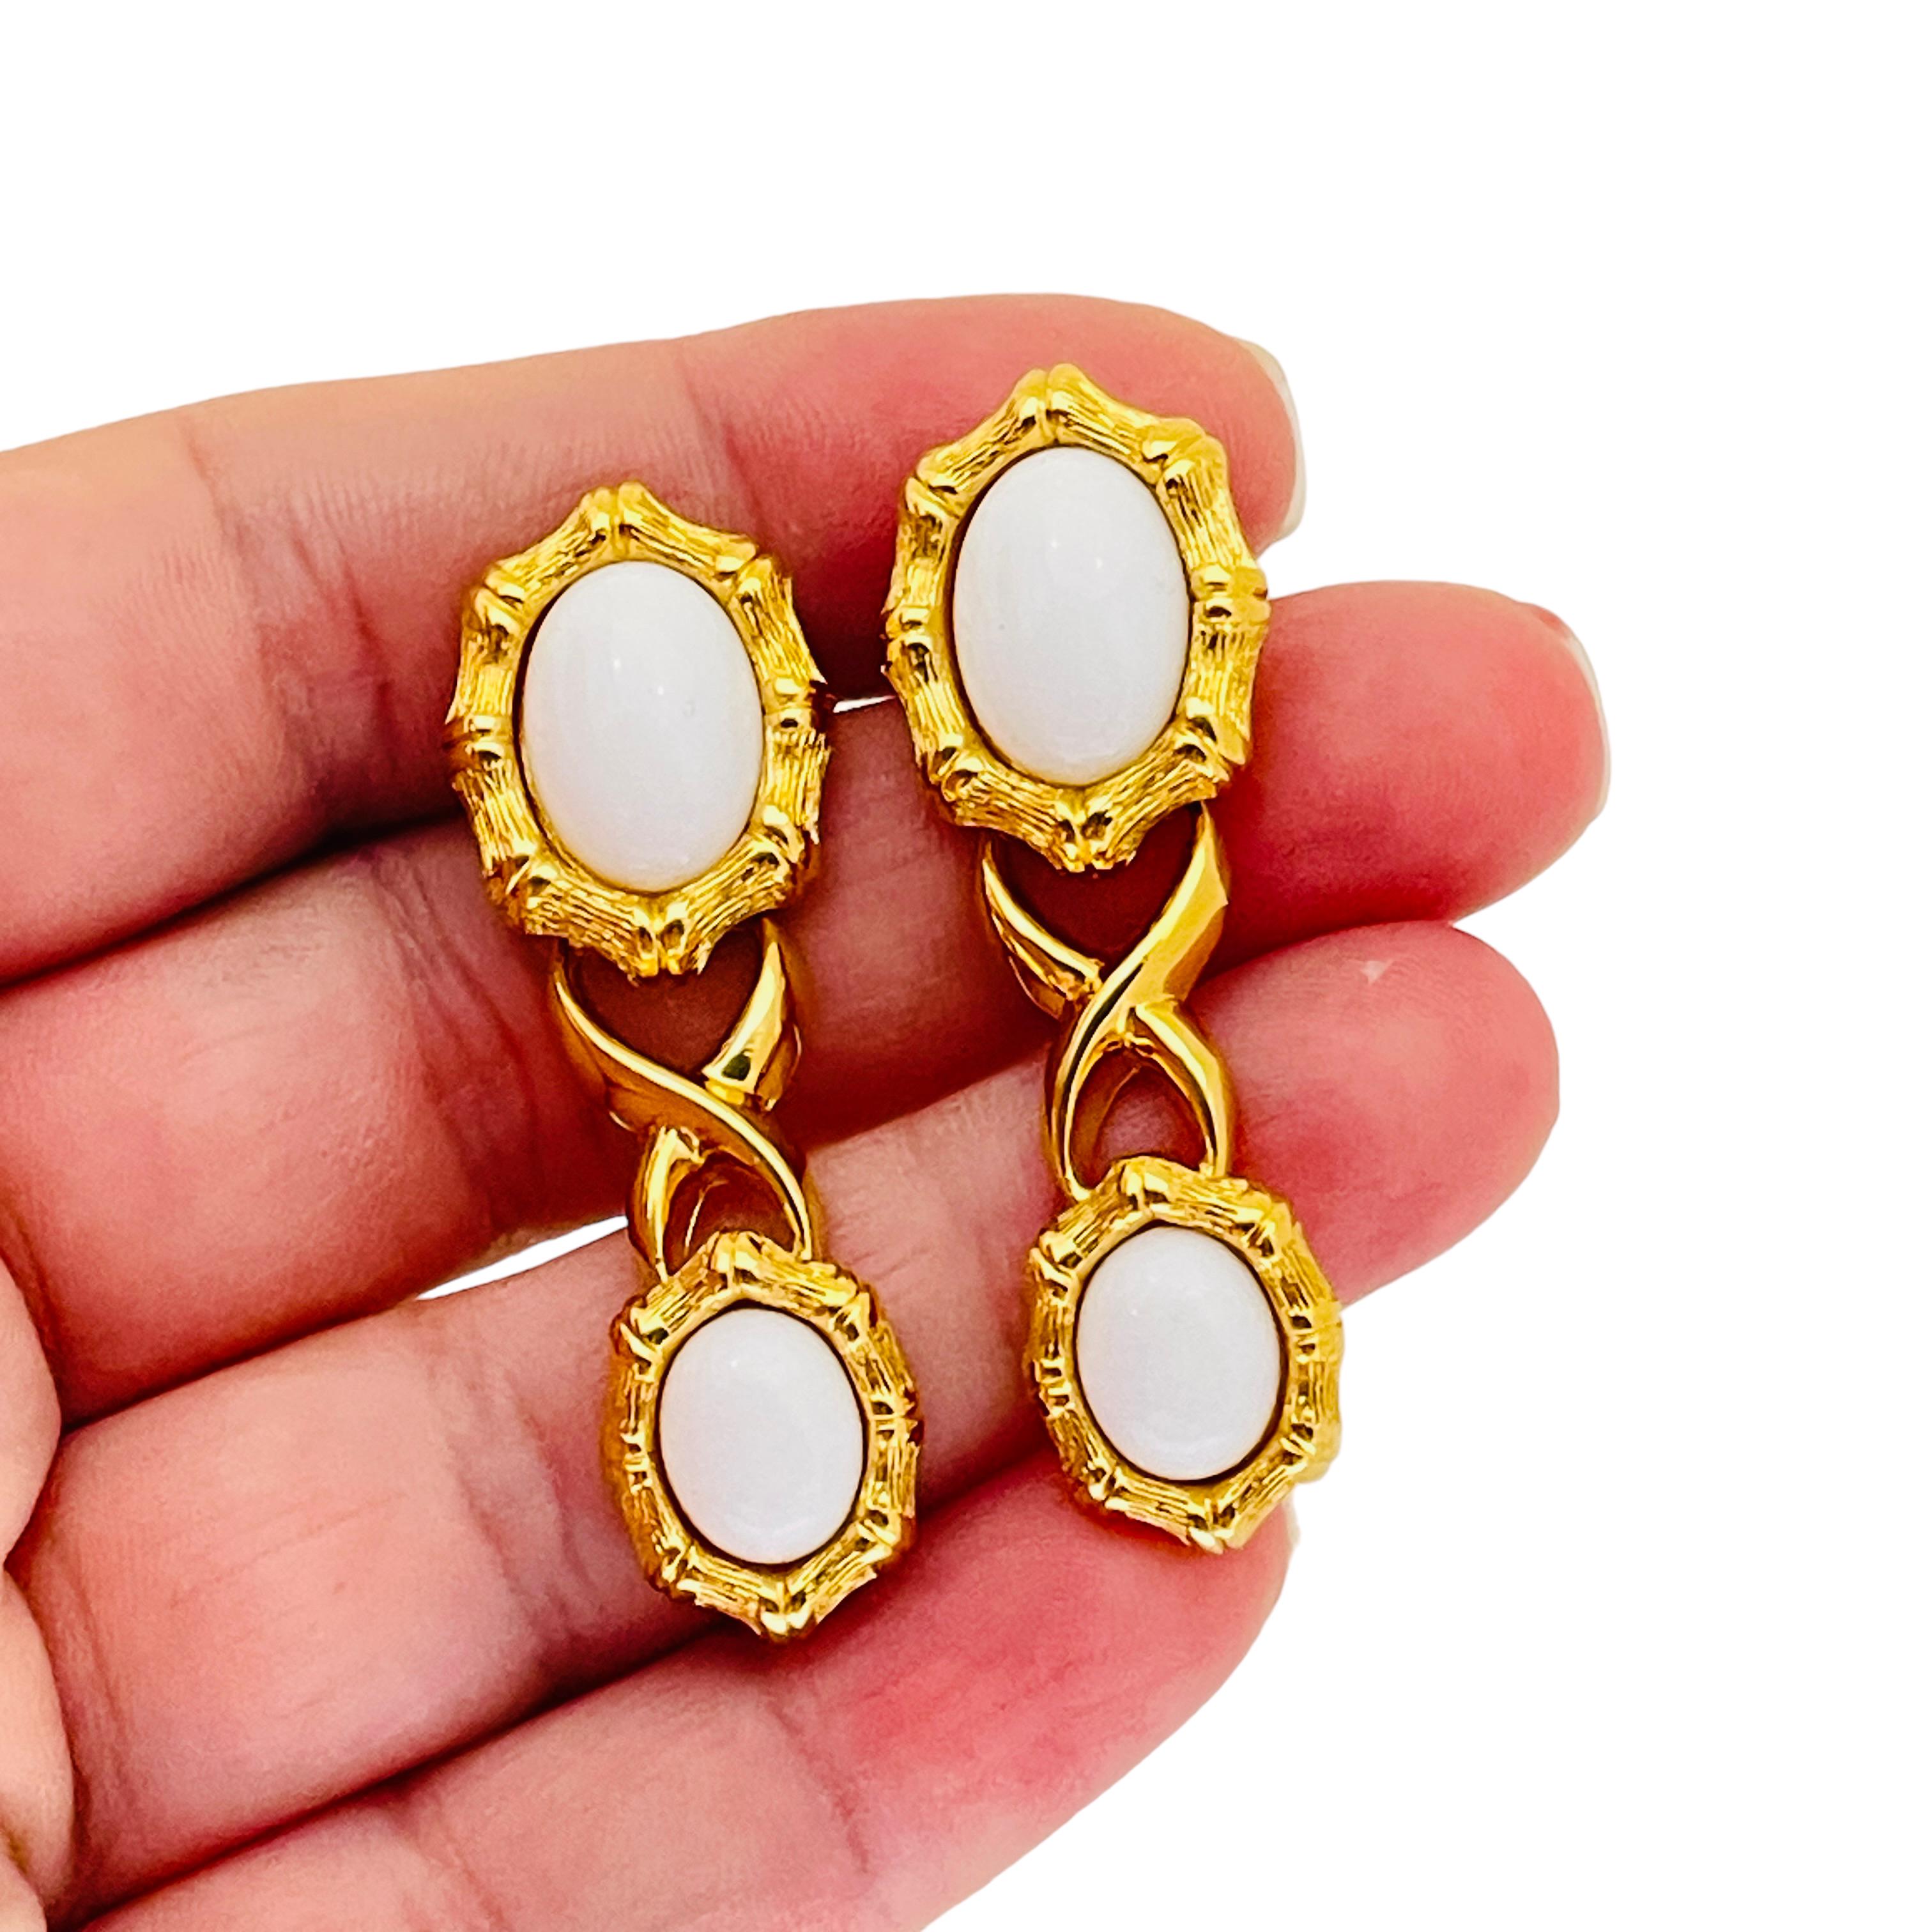 Vintage MONET gold white lucite designer runway earrings  In Excellent Condition For Sale In Palos Hills, IL